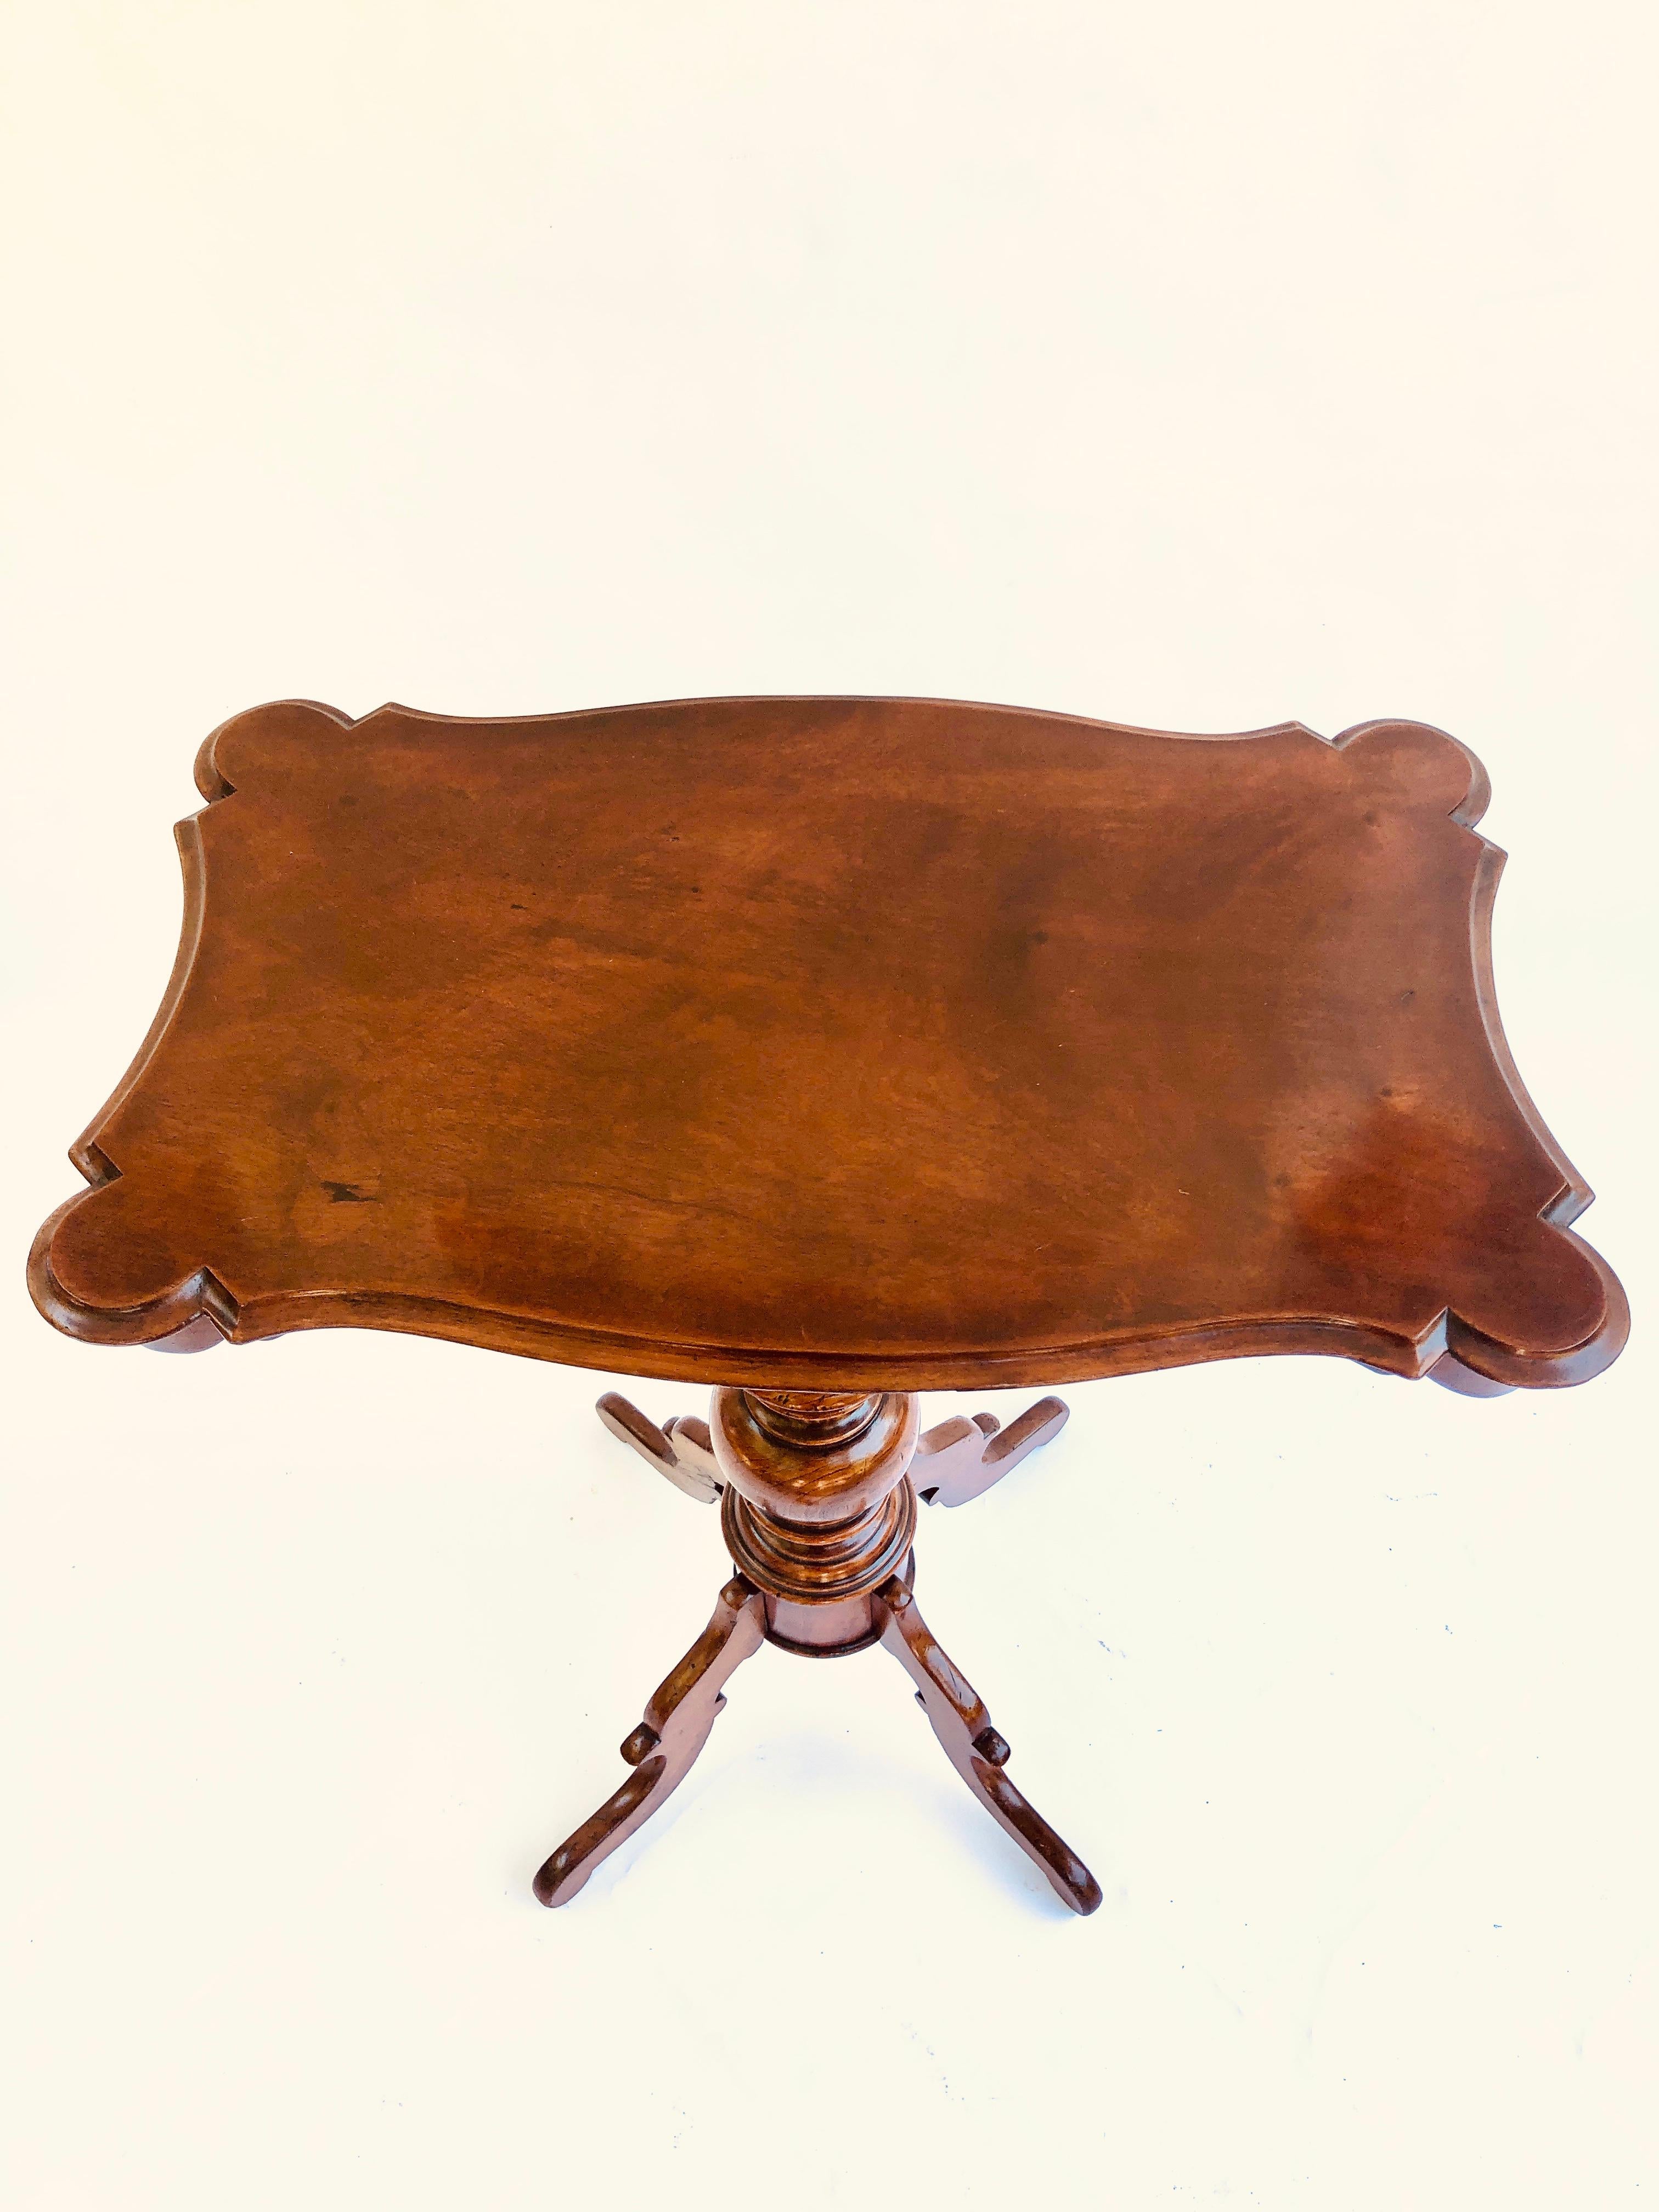 Quality Antique 19th Century Victorian Mahogany Lamp/Side Table For Sale 1